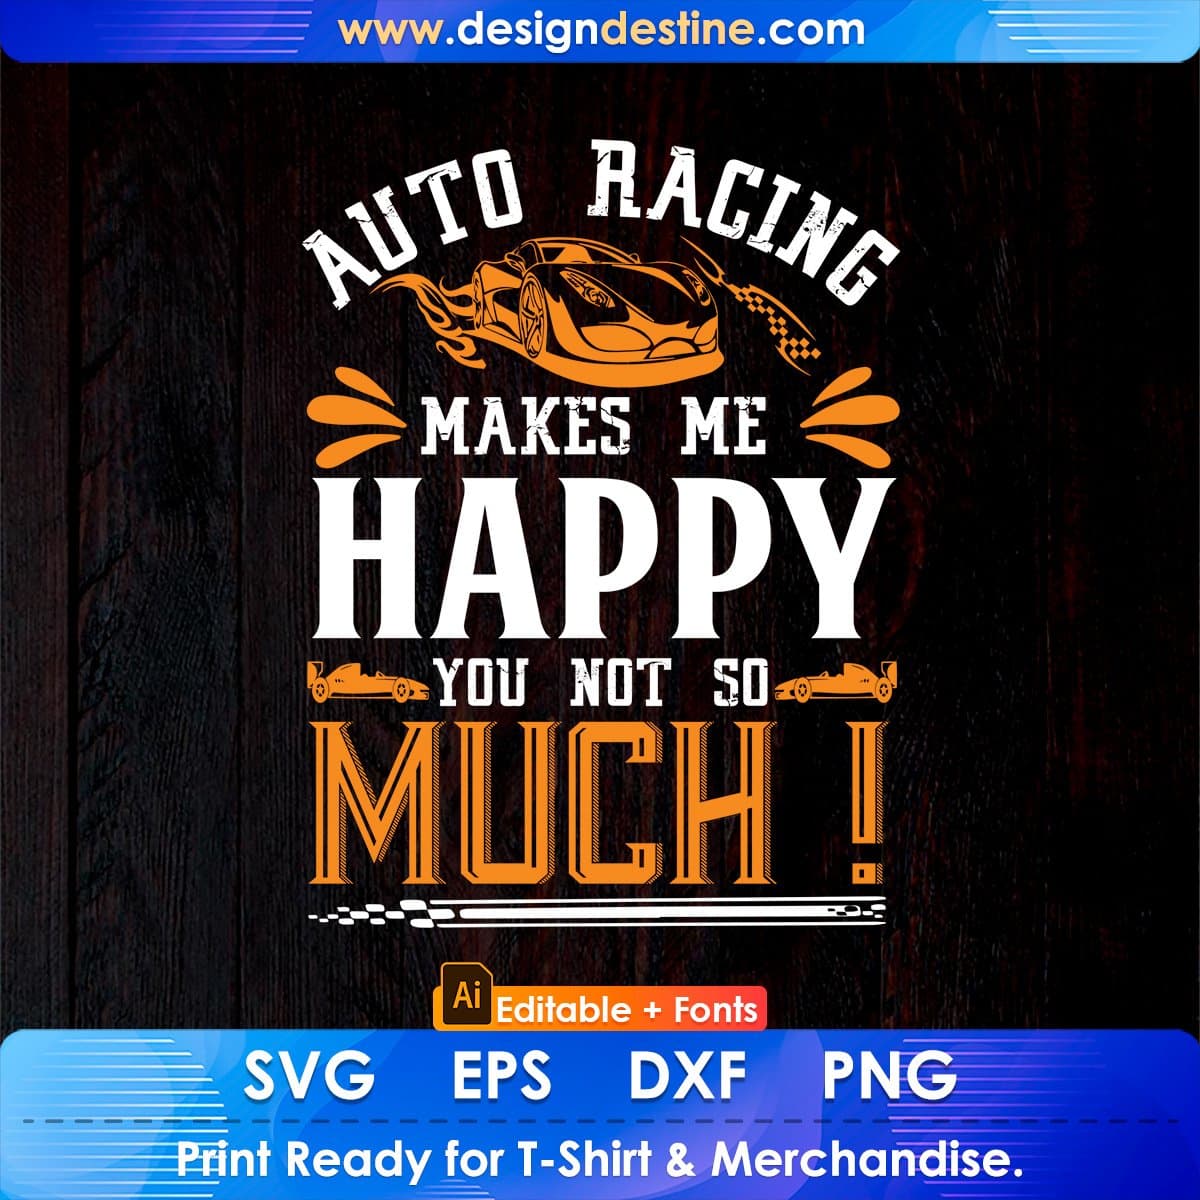 Auto Racing Makes Me Happy You Not So Much Editable T shirt Design In Ai Svg Printable Files